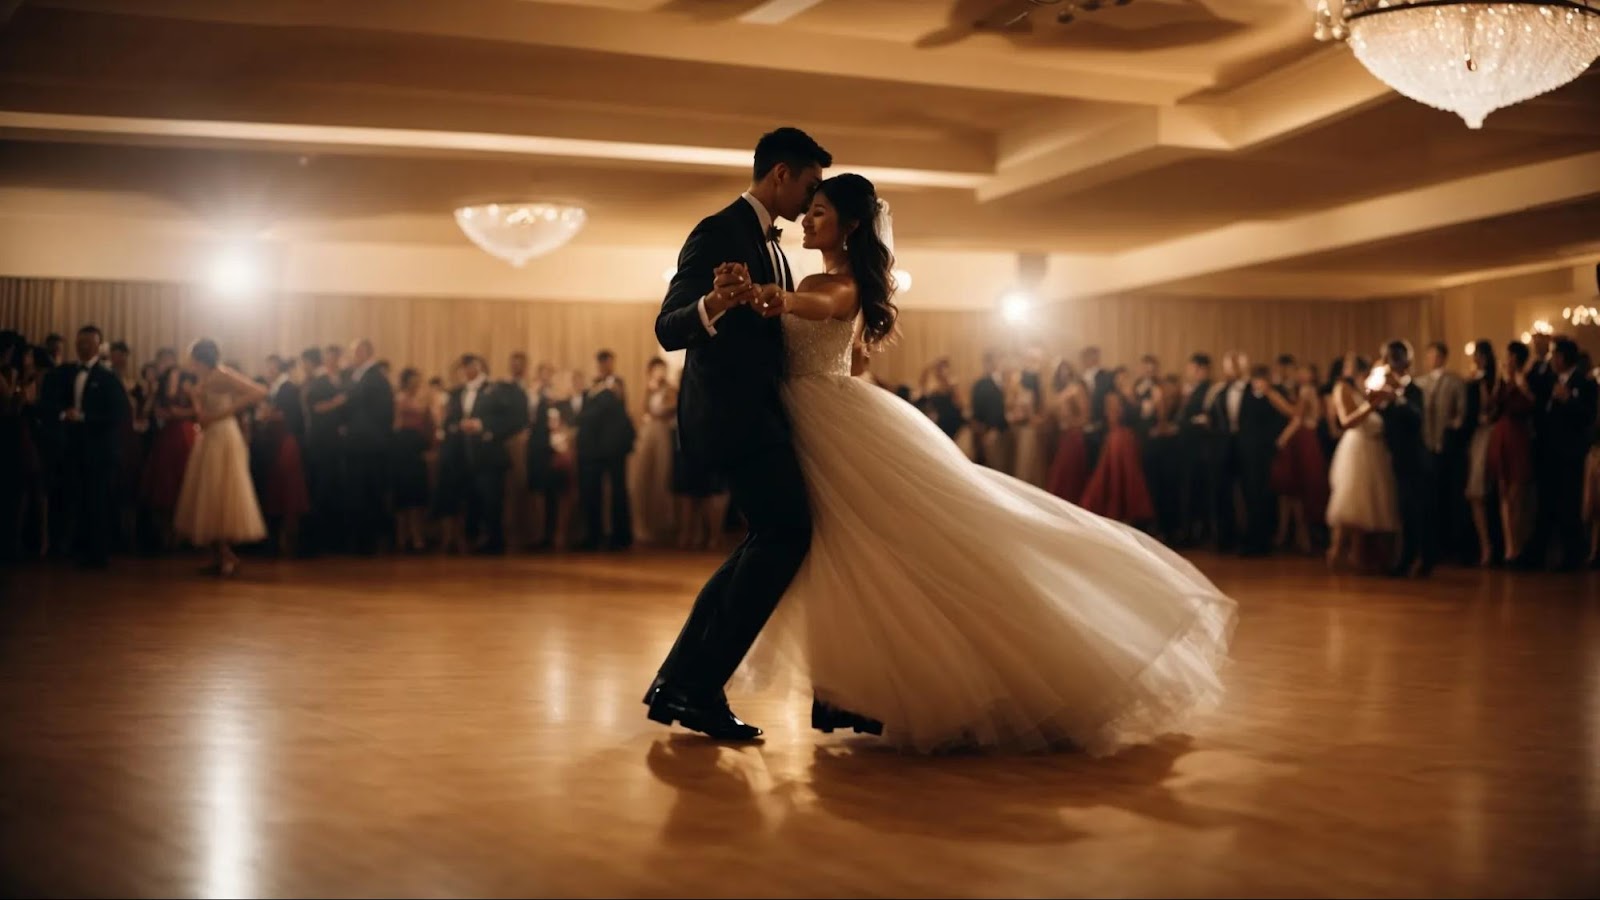 a couple glides across a dance floor, each embodying the distinct essence of a ballroom dance style.